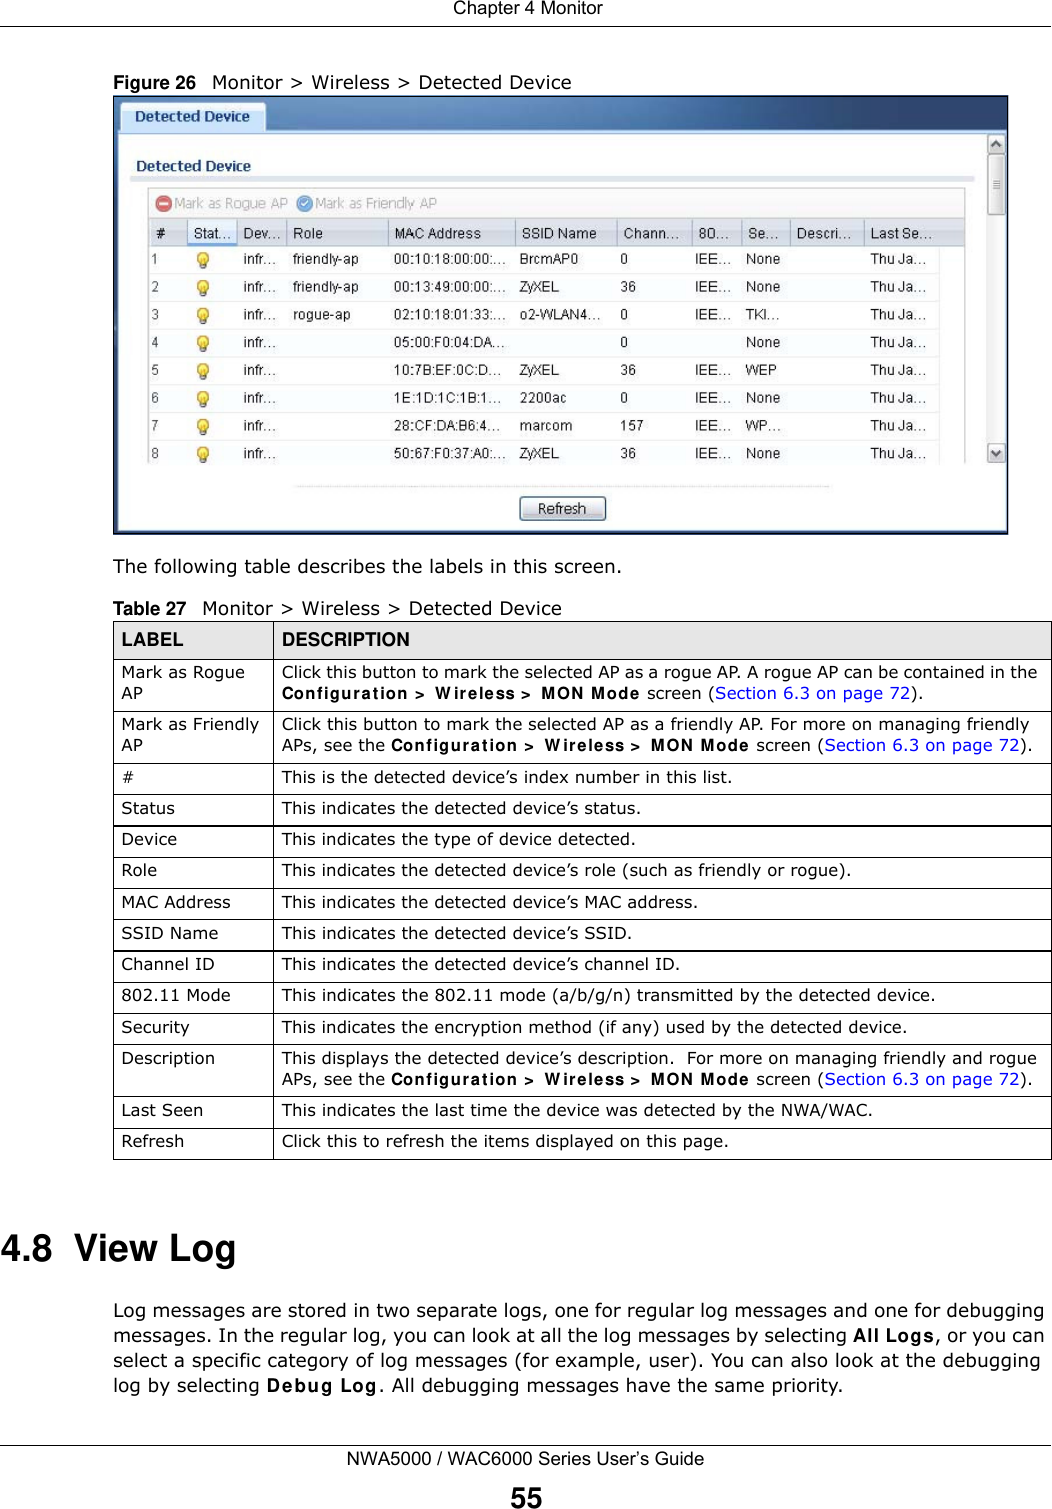  Chapter 4 MonitorNWA5000 / WAC6000 Series User’s Guide55Figure 26   Monitor &gt; Wireless &gt; Detected Device  The following table describes the labels in this screen. 4.8  View LogLog messages are stored in two separate logs, one for regular log messages and one for debugging messages. In the regular log, you can look at all the log messages by selecting All Logs, or you can select a specific category of log messages (for example, user). You can also look at the debugging log by selecting Debug Log. All debugging messages have the same priority. Table 27   Monitor &gt; Wireless &gt; Detected DeviceLABEL DESCRIPTIONMark as Rogue APClick this button to mark the selected AP as a rogue AP. A rogue AP can be contained in the Configuration &gt; Wireless &gt; MON Mode screen (Section 6.3 on page 72).Mark as Friendly APClick this button to mark the selected AP as a friendly AP. For more on managing friendly APs, see the Configuration &gt; Wireless &gt; MON Mode screen (Section 6.3 on page 72).# This is the detected device’s index number in this list.Status This indicates the detected device’s status.Device This indicates the type of device detected.Role This indicates the detected device’s role (such as friendly or rogue).MAC Address This indicates the detected device’s MAC address.SSID Name This indicates the detected device’s SSID.Channel ID This indicates the detected device’s channel ID.802.11 Mode This indicates the 802.11 mode (a/b/g/n) transmitted by the detected device.Security This indicates the encryption method (if any) used by the detected device.Description This displays the detected device’s description.  For more on managing friendly and rogue APs, see the Configuration &gt; Wireless &gt; MON Mode screen (Section 6.3 on page 72).Last Seen This indicates the last time the device was detected by the NWA/WAC.Refresh Click this to refresh the items displayed on this page.